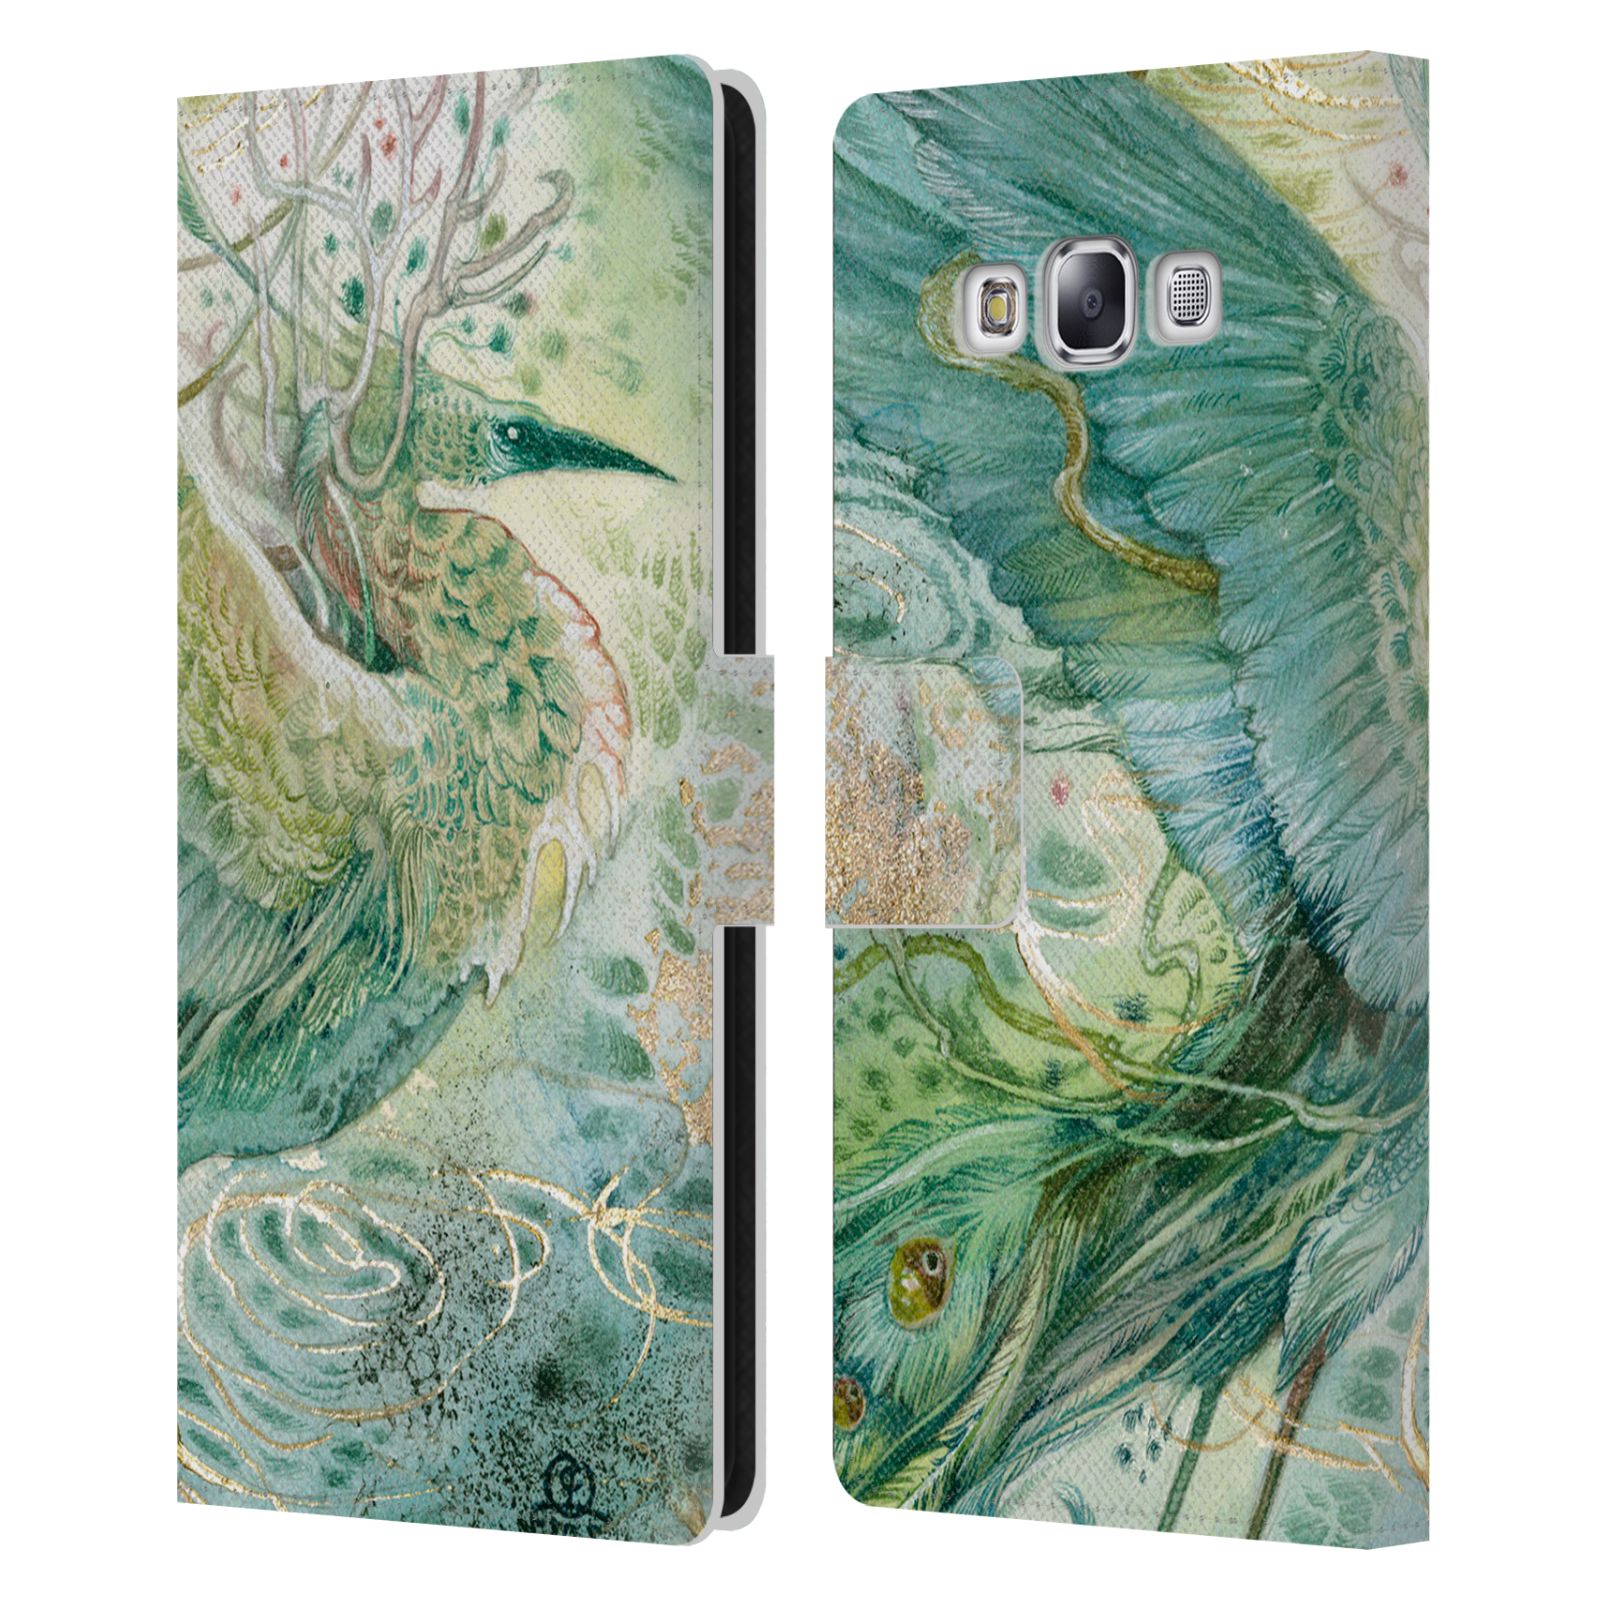 OFFICIAL STEPHANIE LAW BIRDS LEATHER BOOK WALLET CASE COVER FOR 